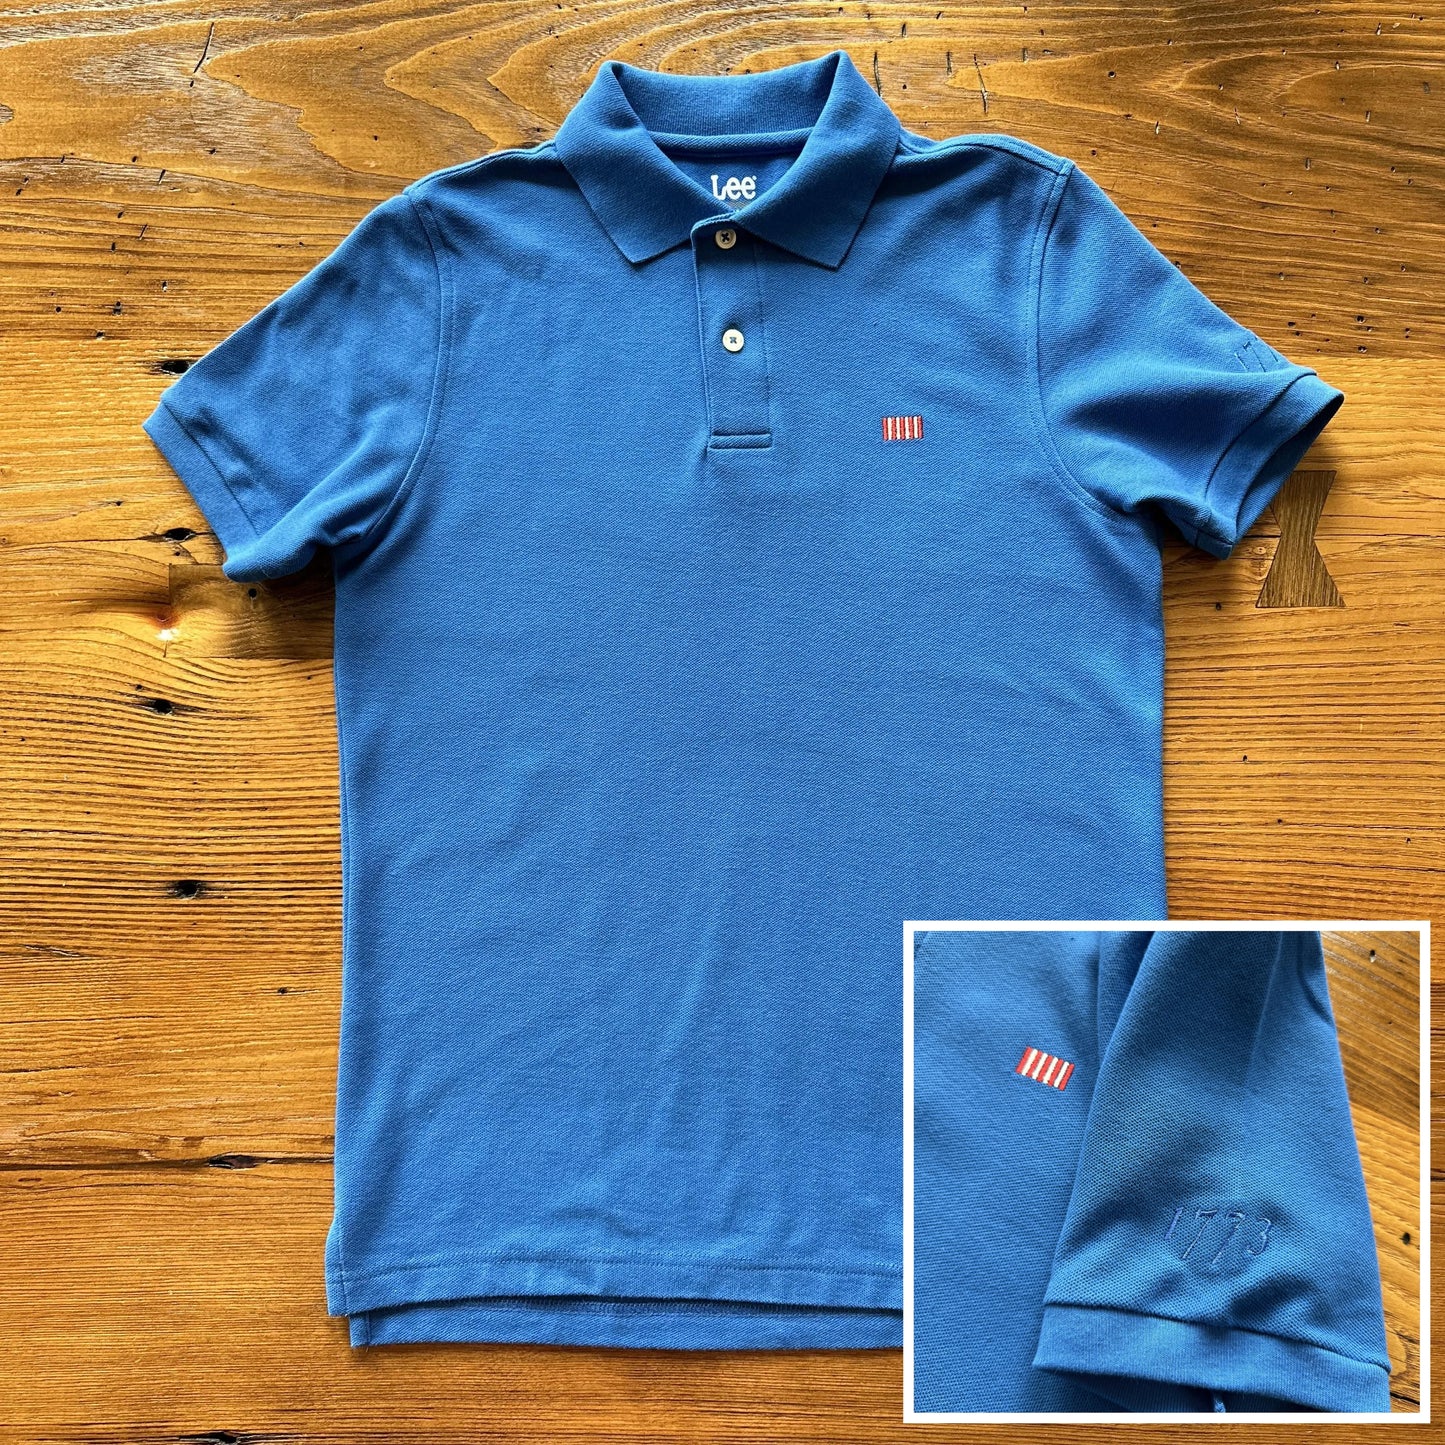 "Sons of Liberty" Embroidered shirt with 1773 on the sleeve — Royal blue — Only one in Medium